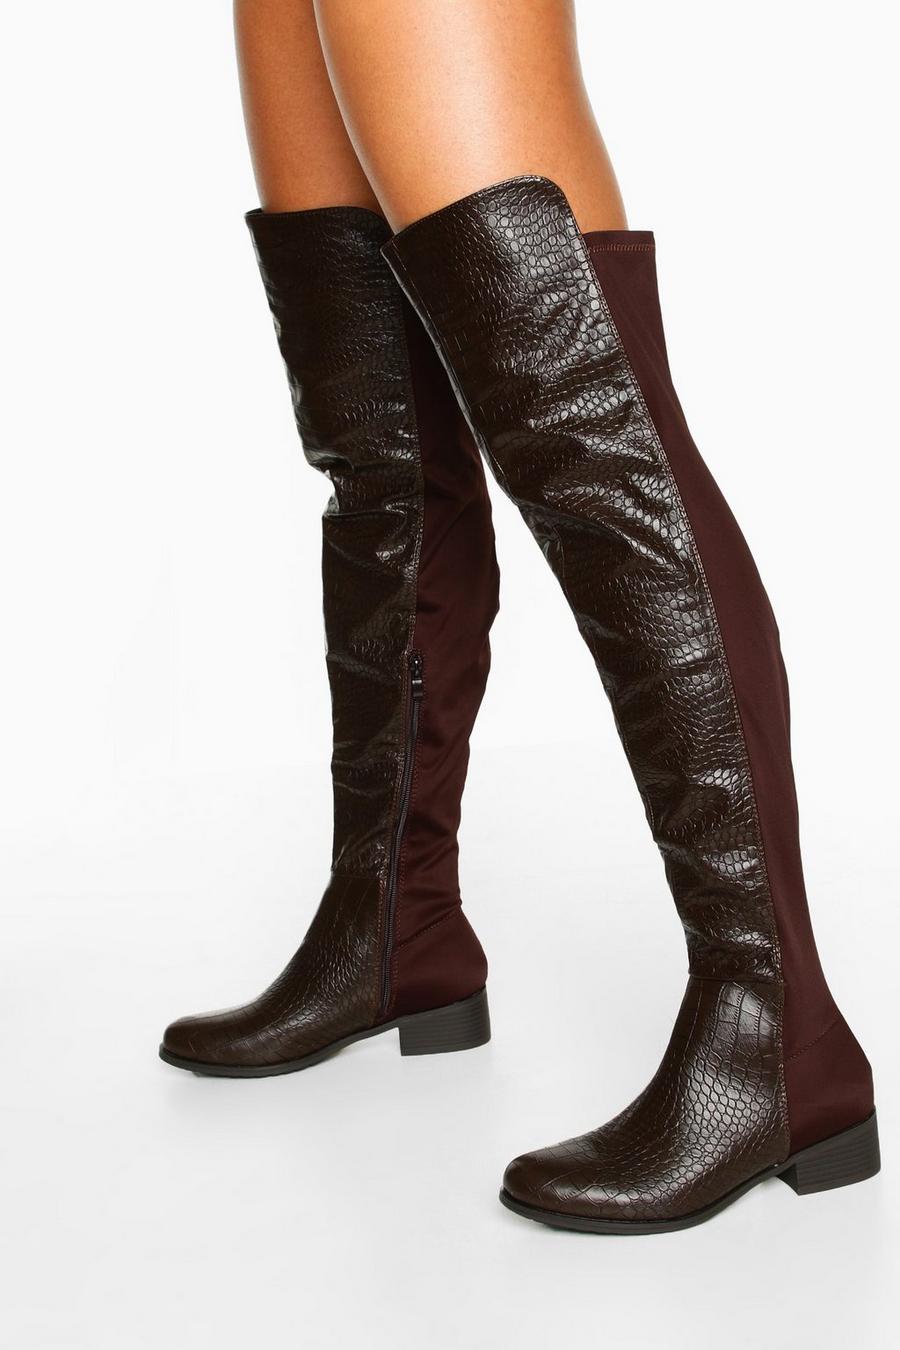 Chocolate Croc Over The Knee High Boots image number 1